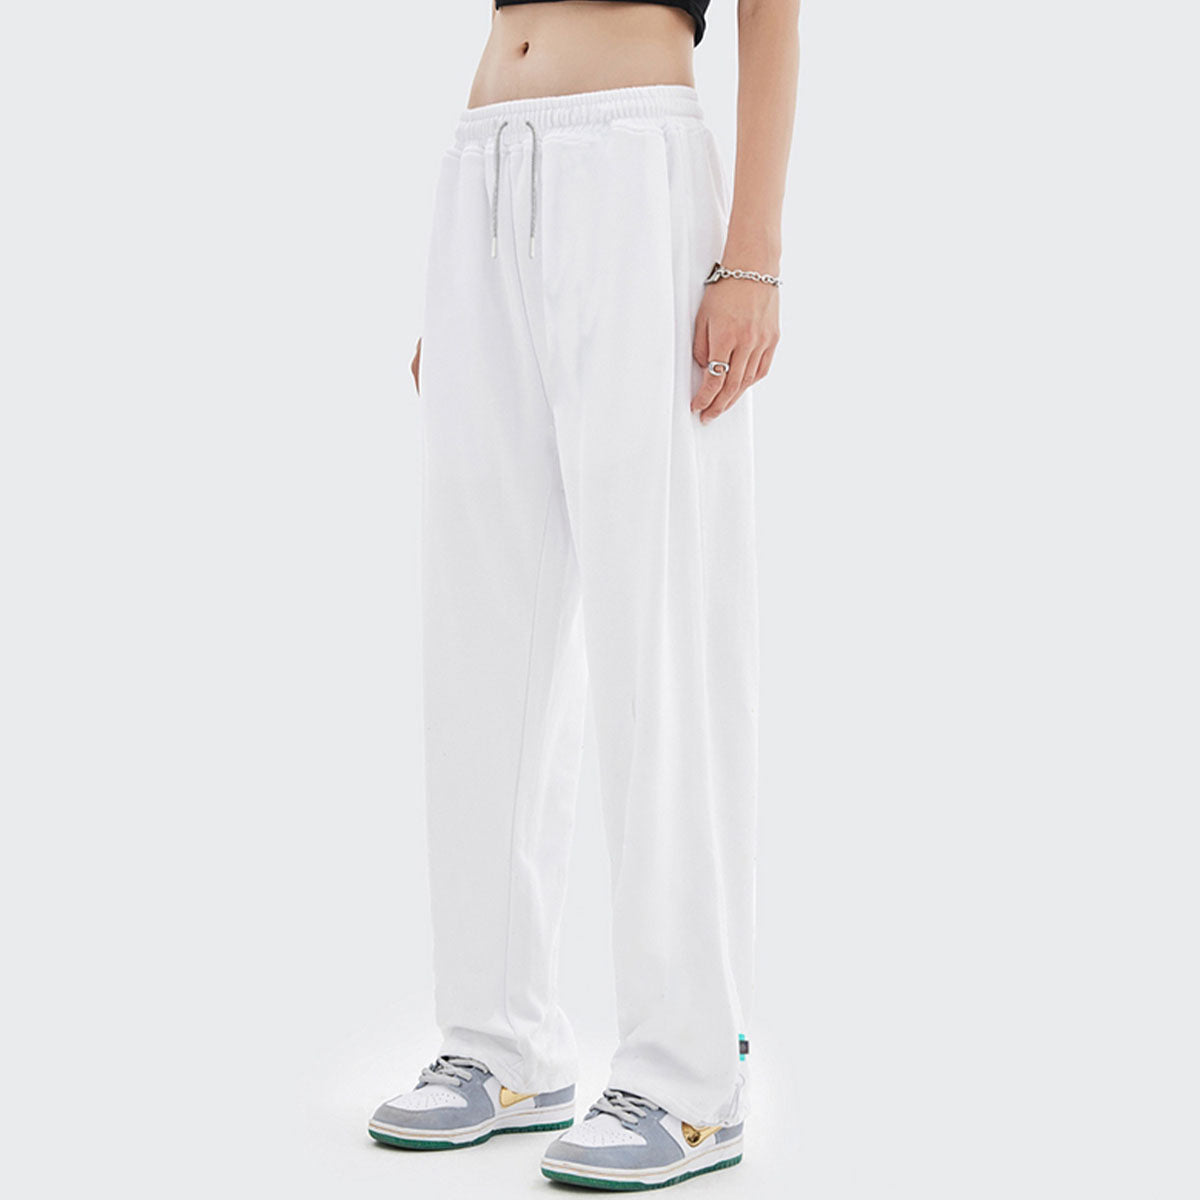 Buy Candy Dance Drawstring Pants by Body404 by Body404